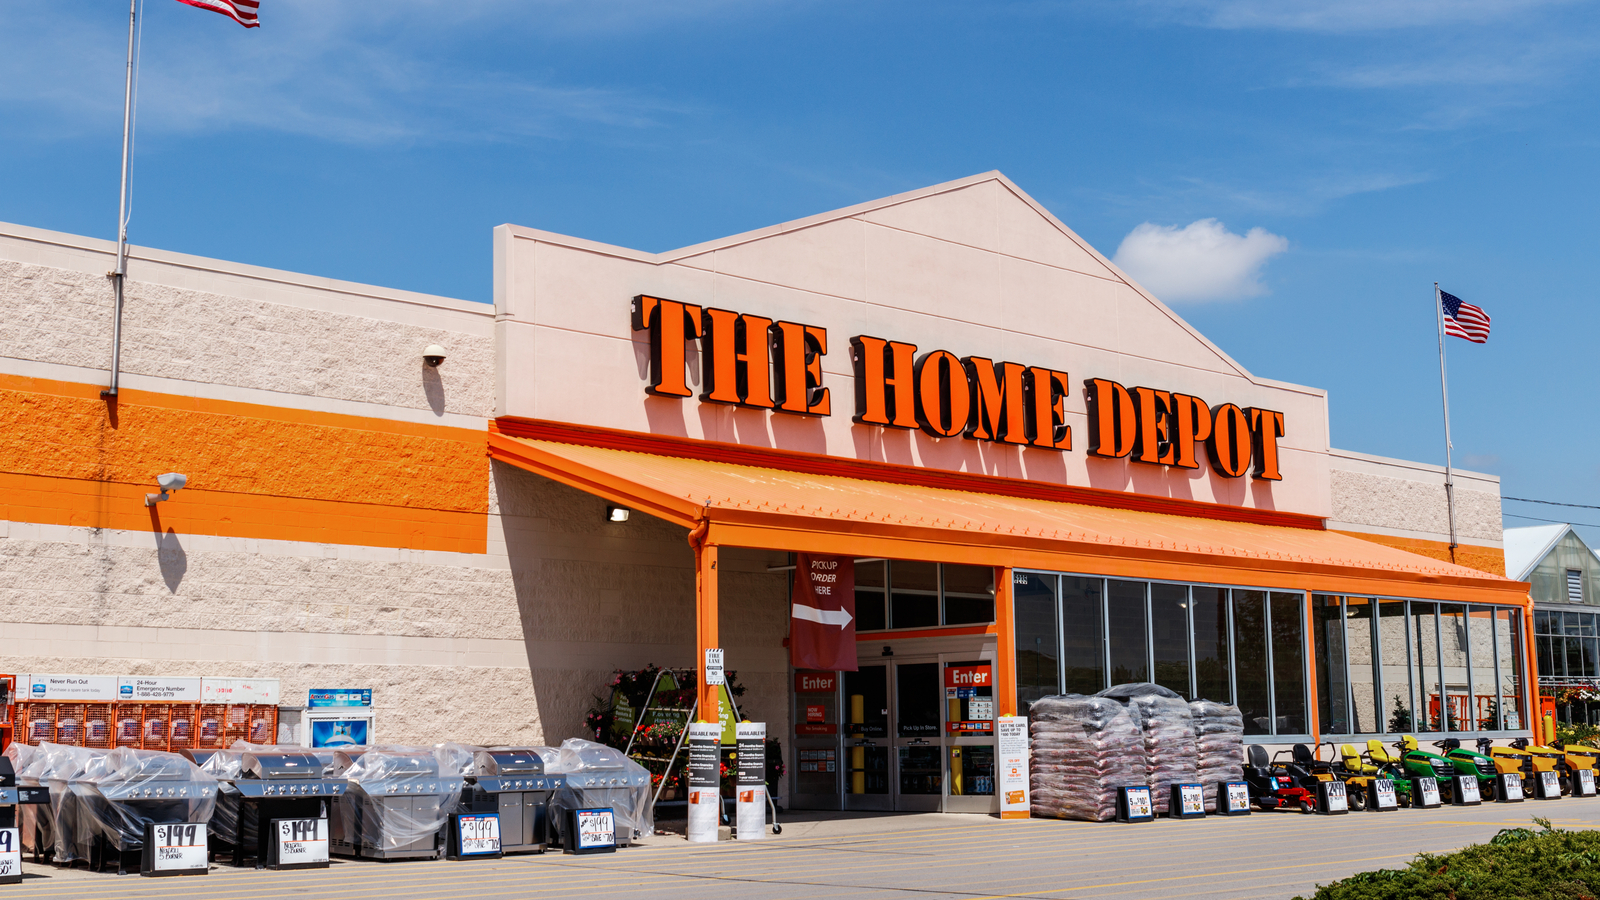 Home Depot (HD) storefront on a sunny day